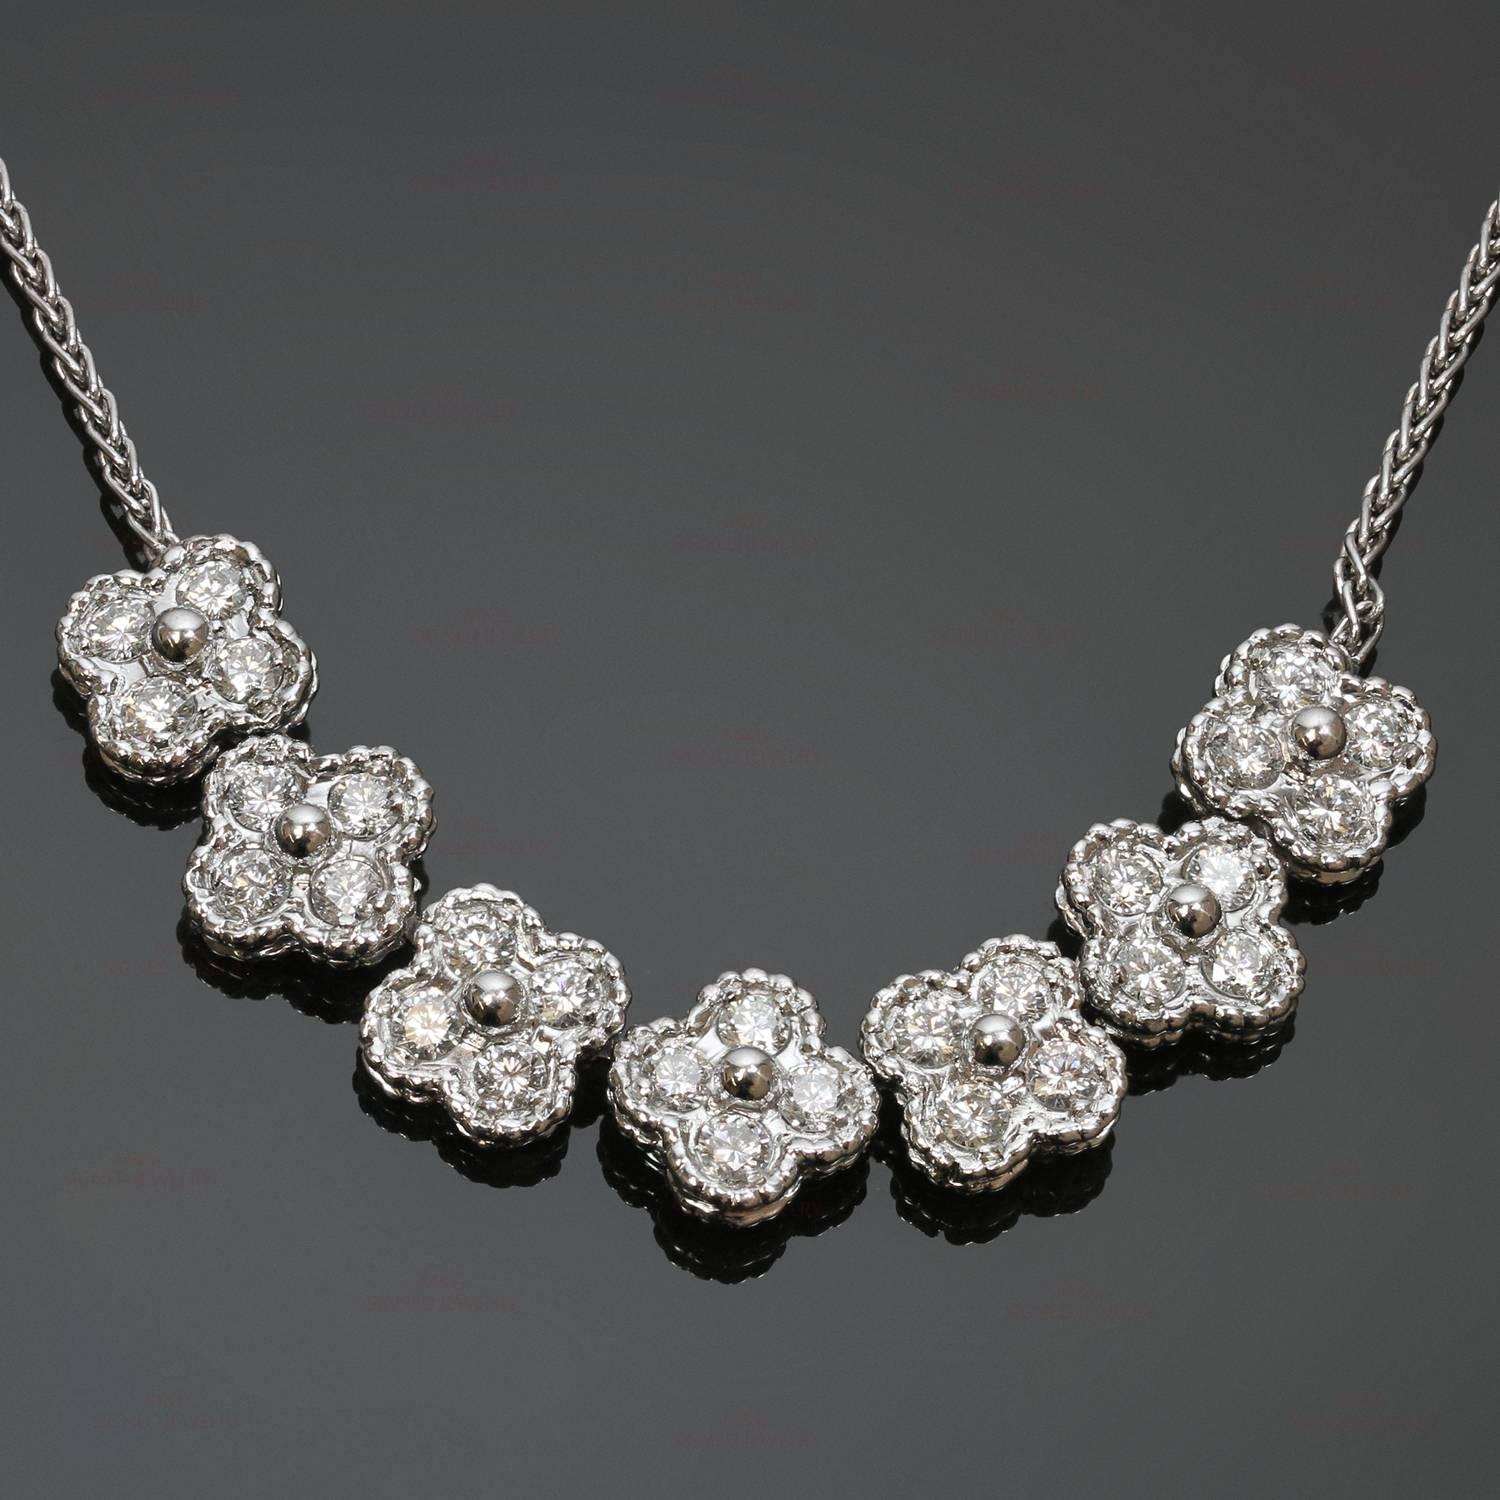 This exquisite Arno necklace from the Vintage Alhambra collection is crafted in 18k white gold and features a sparkling floral design set with brilliant-cut diamonds of an estimated 2.10 carats. Made in France circa 2000s. A timeless classic.